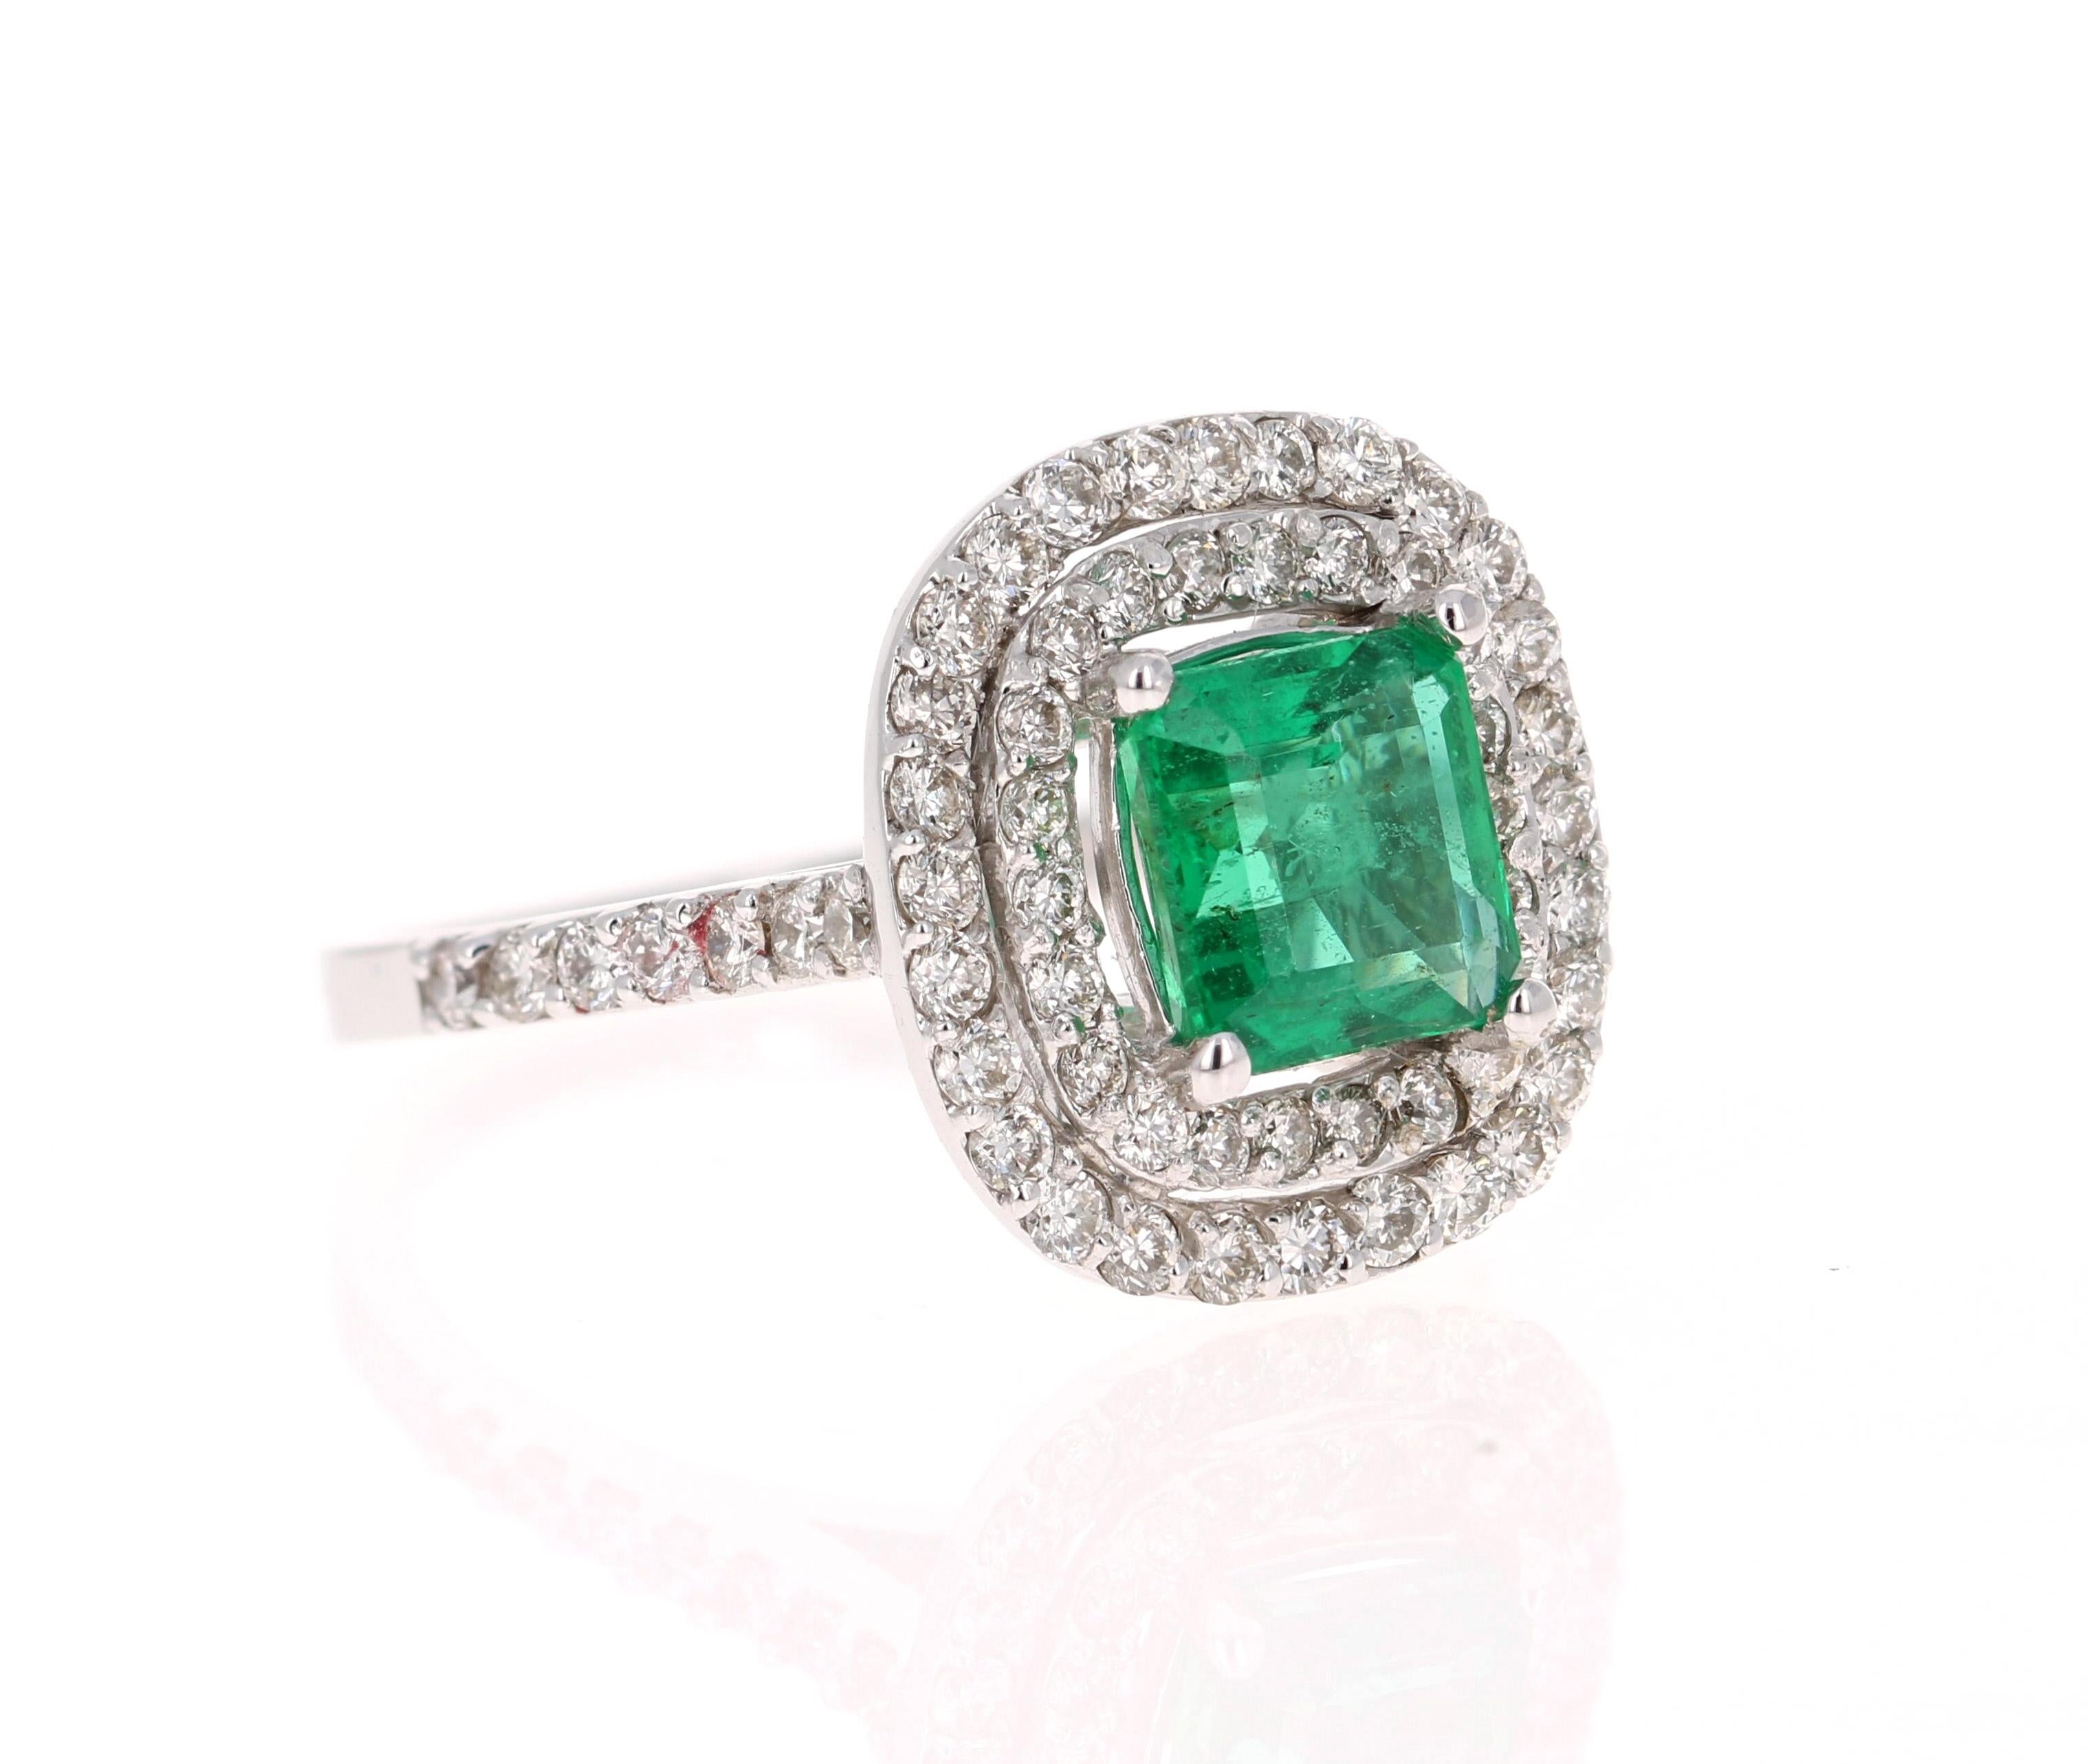 A beautiful double halo setting holding a Natural Square-Step Cut Emerald that weighs 1.43 Carats. Surrounded by a halo of 64 Round Cut Diamonds that weigh 0.94 Carats and has a clarity and color of VS-H. The total carat weight of the ring is 2.37